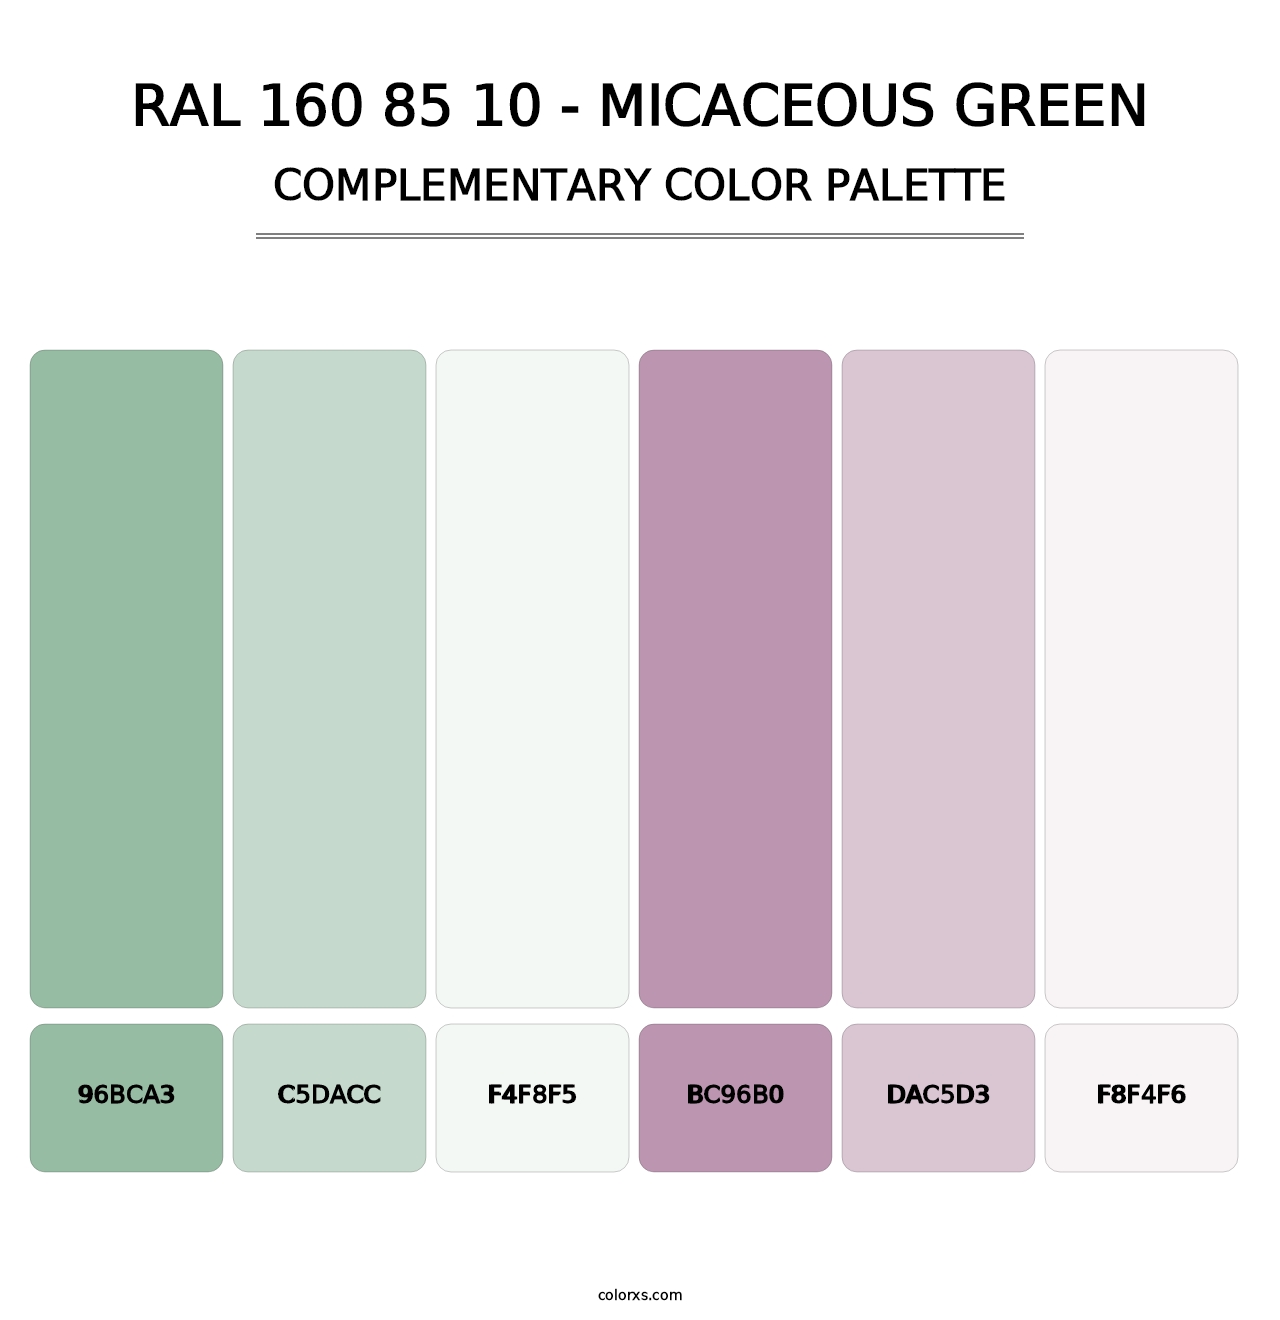 RAL 160 85 10 - Micaceous Green - Complementary Color Palette